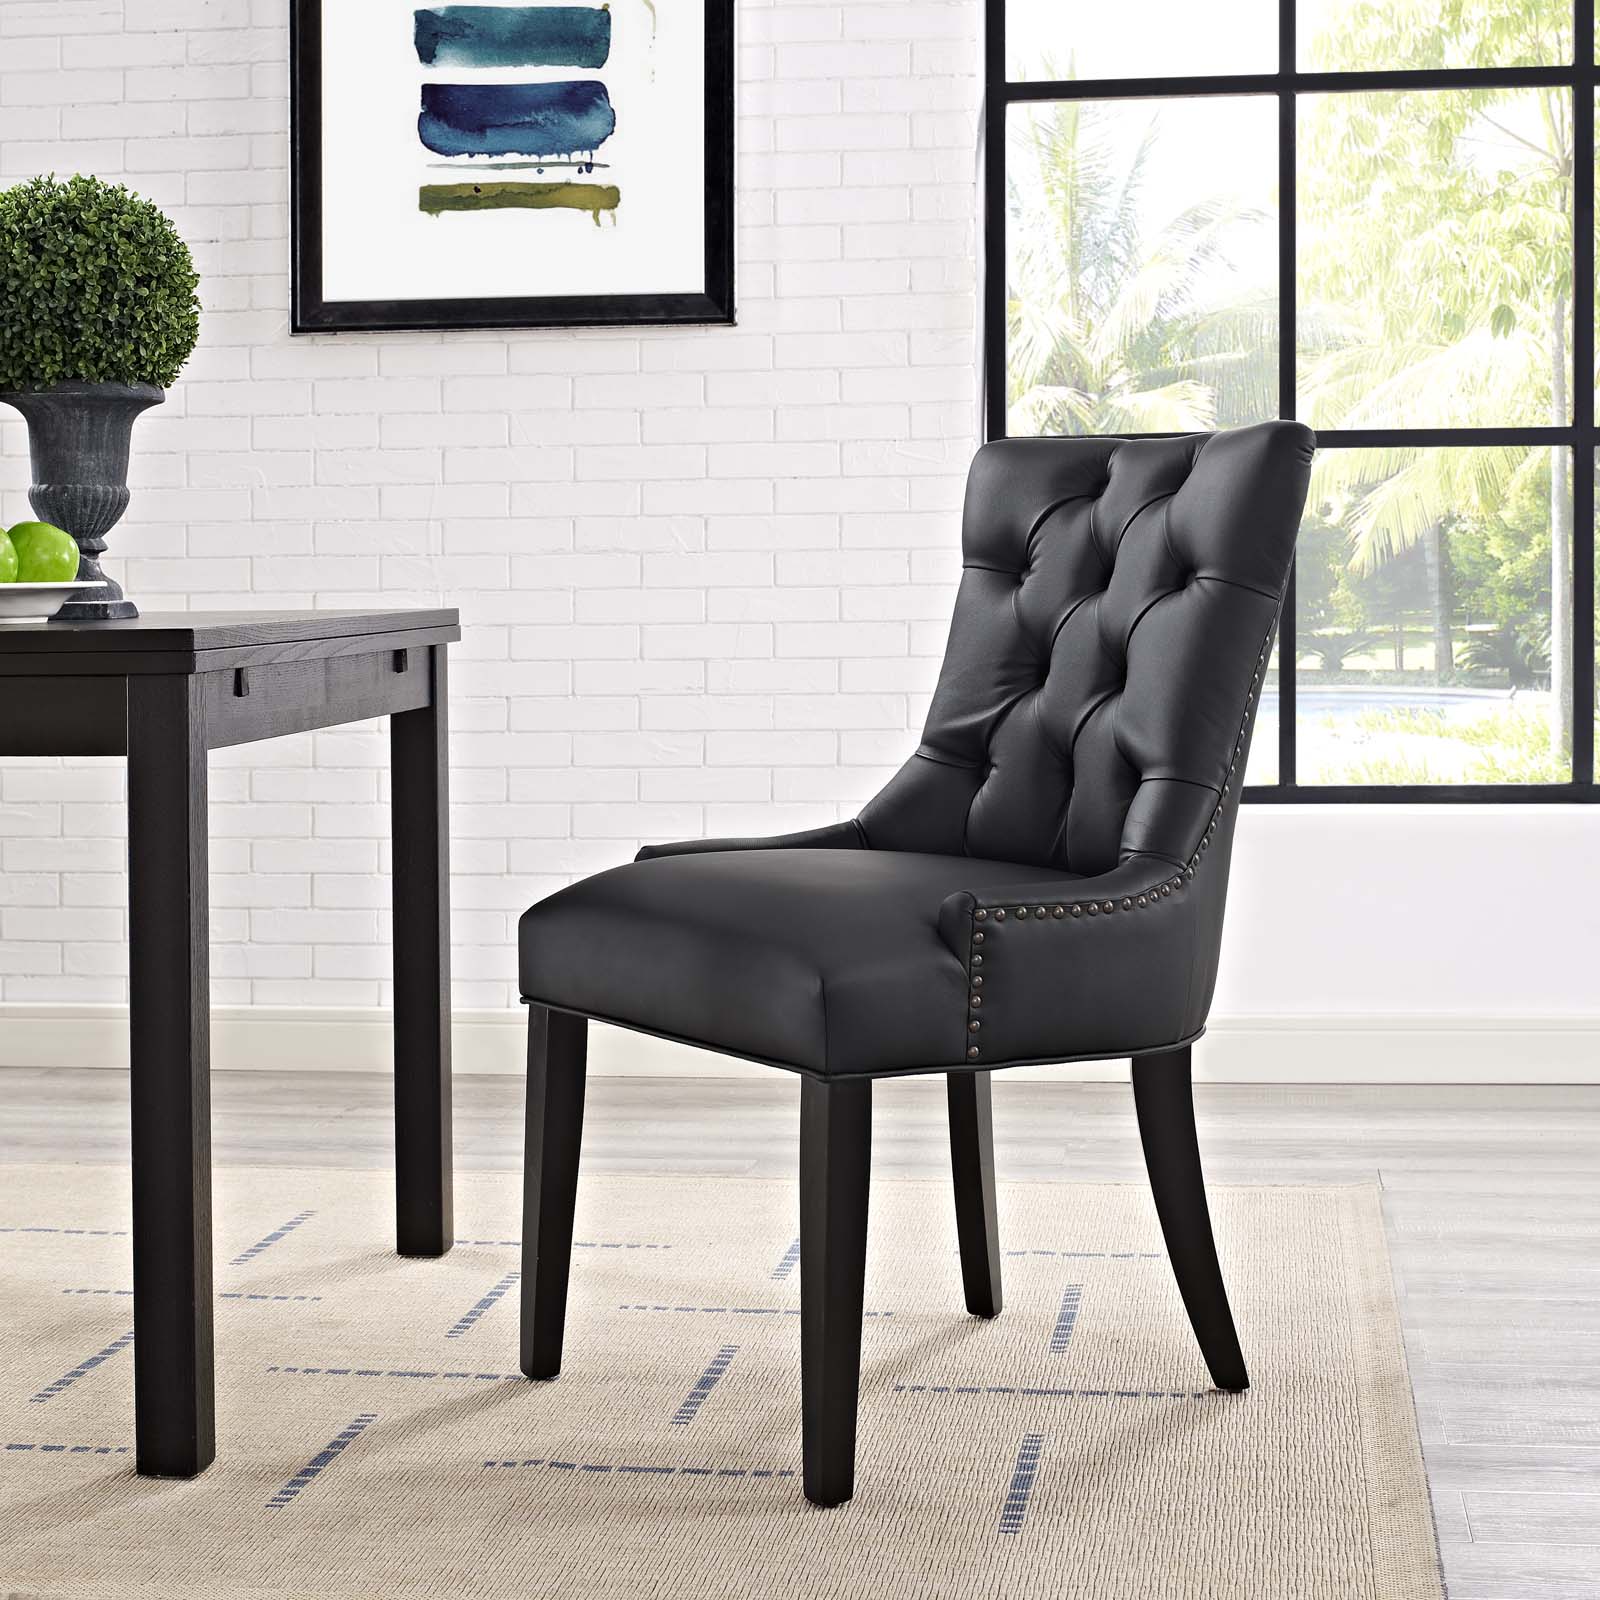 Regent Tufted Vegan Leather Dining Chair - East Shore Modern Home Furnishings